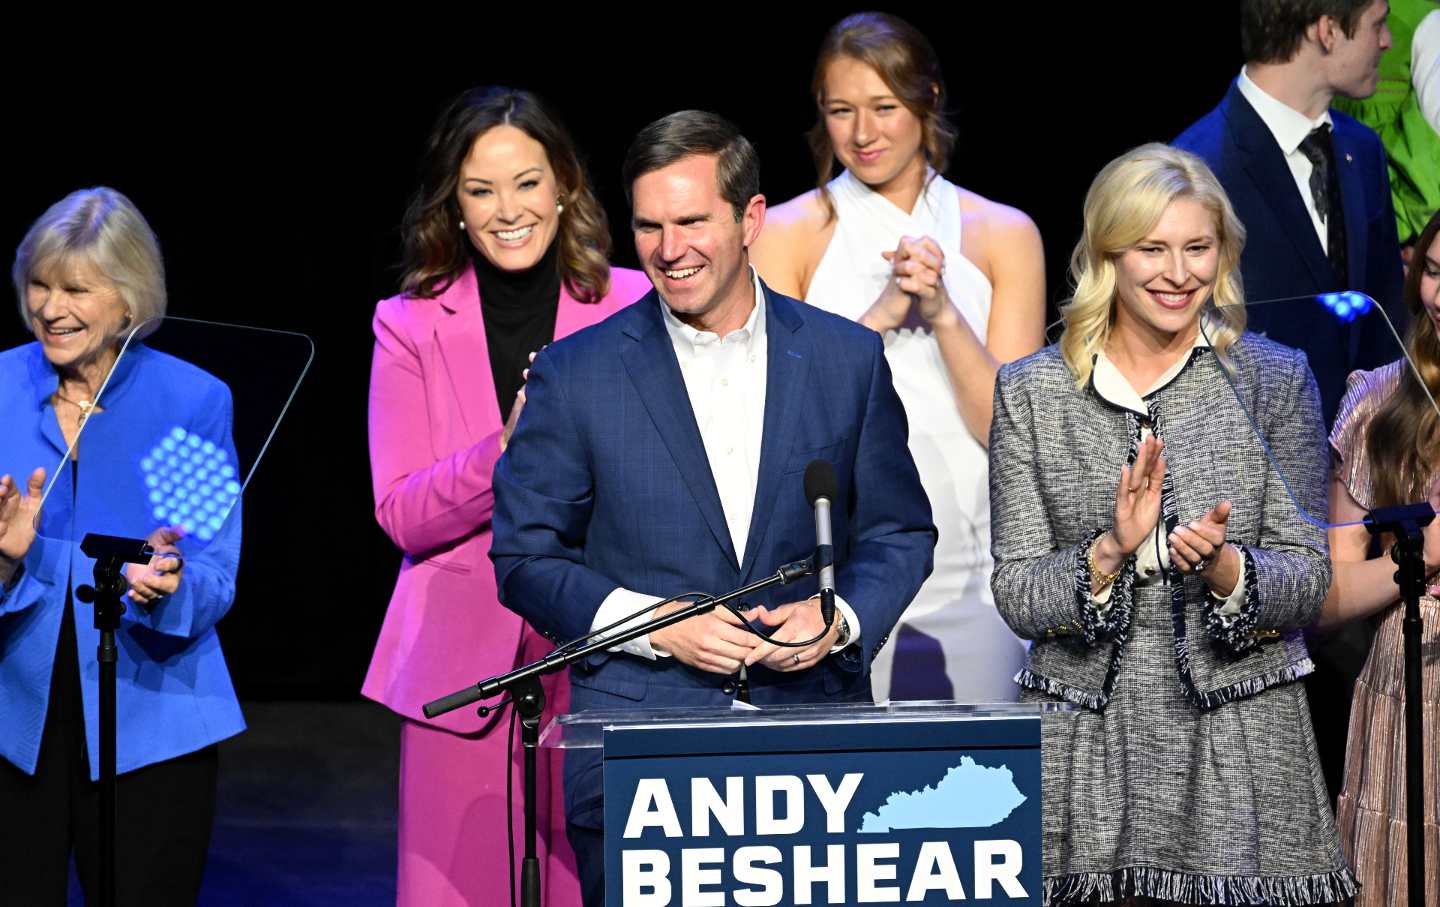 Kentucky incumbent Democratic Gov. Andy Beshear is joined by his wife, Britainy Beshear (R), Kentucky Lt. Governor Jacqueline Coleman (C-L) and his family as he delivers his victory speech to a crowd at an election night event at Old Forrester's Paristown Hall on November 7, 2023 in Louisville, Kentucky.